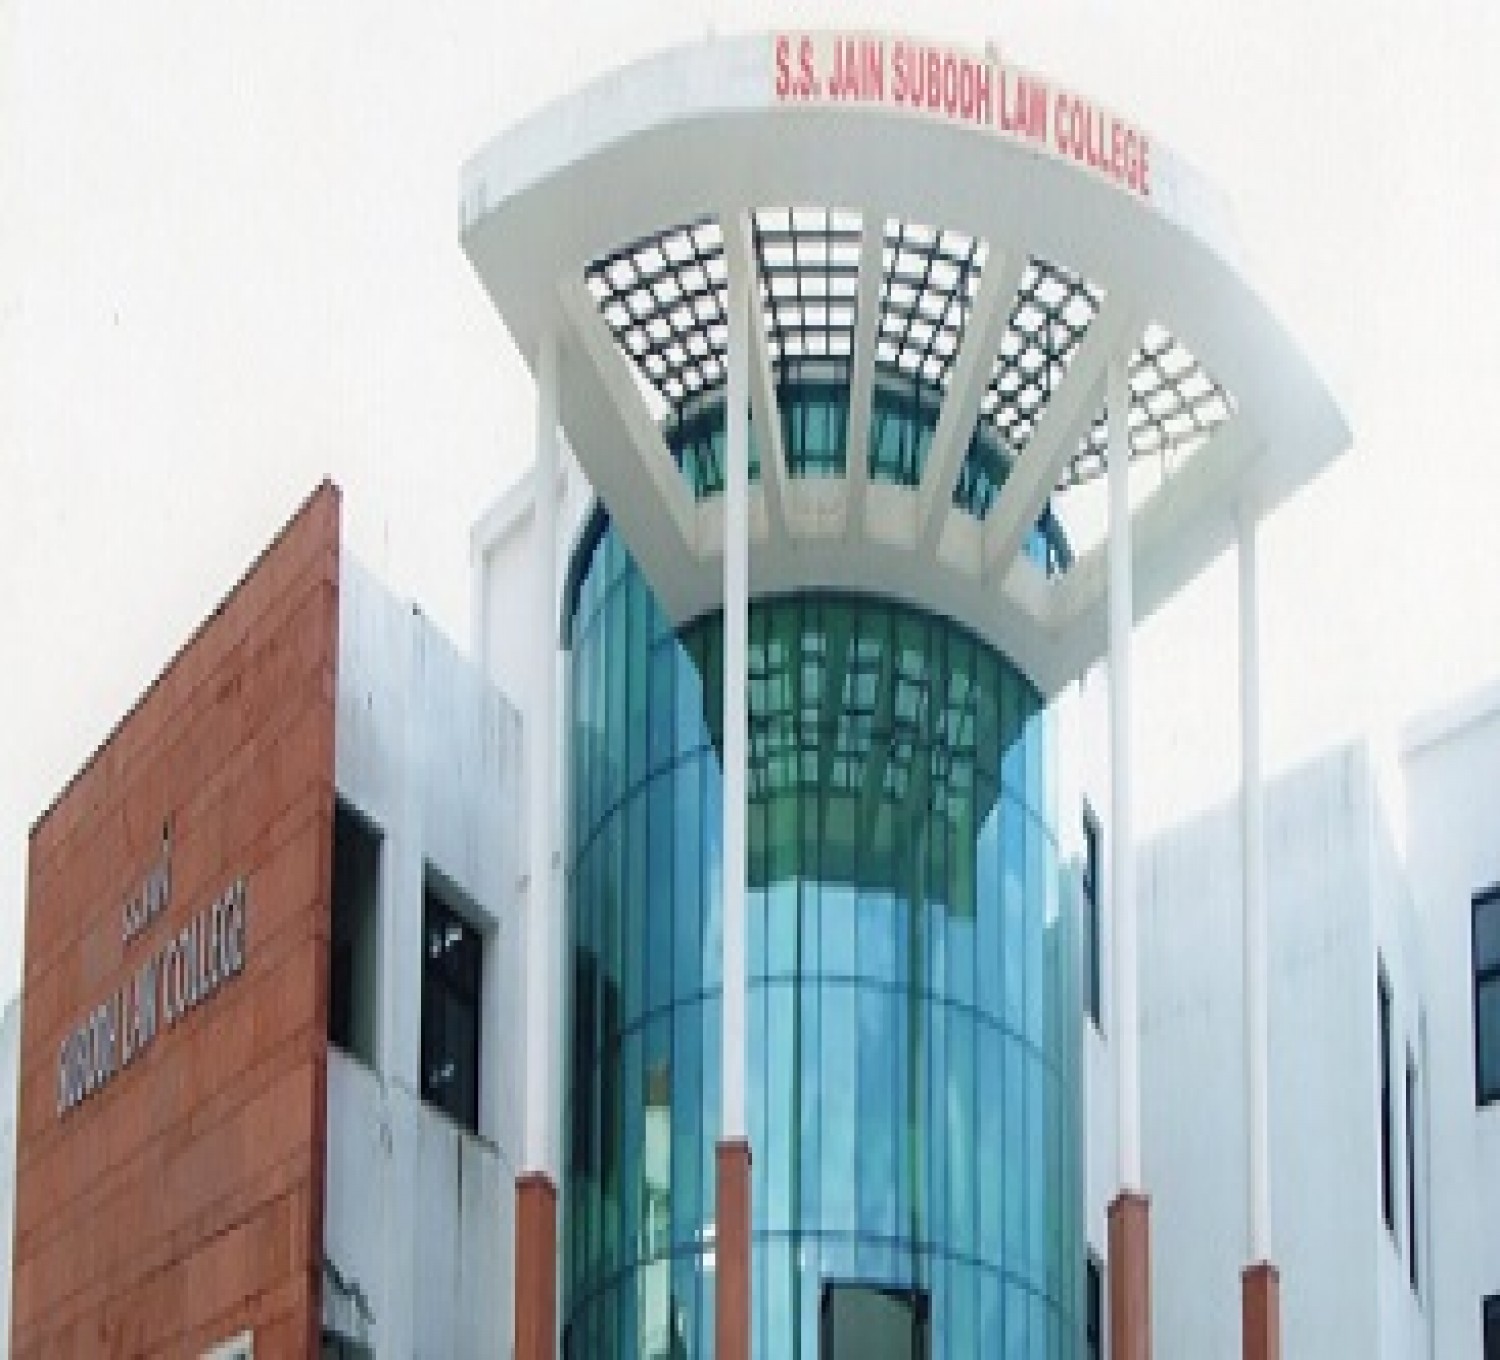 S S Jain Subodh Law College-cover